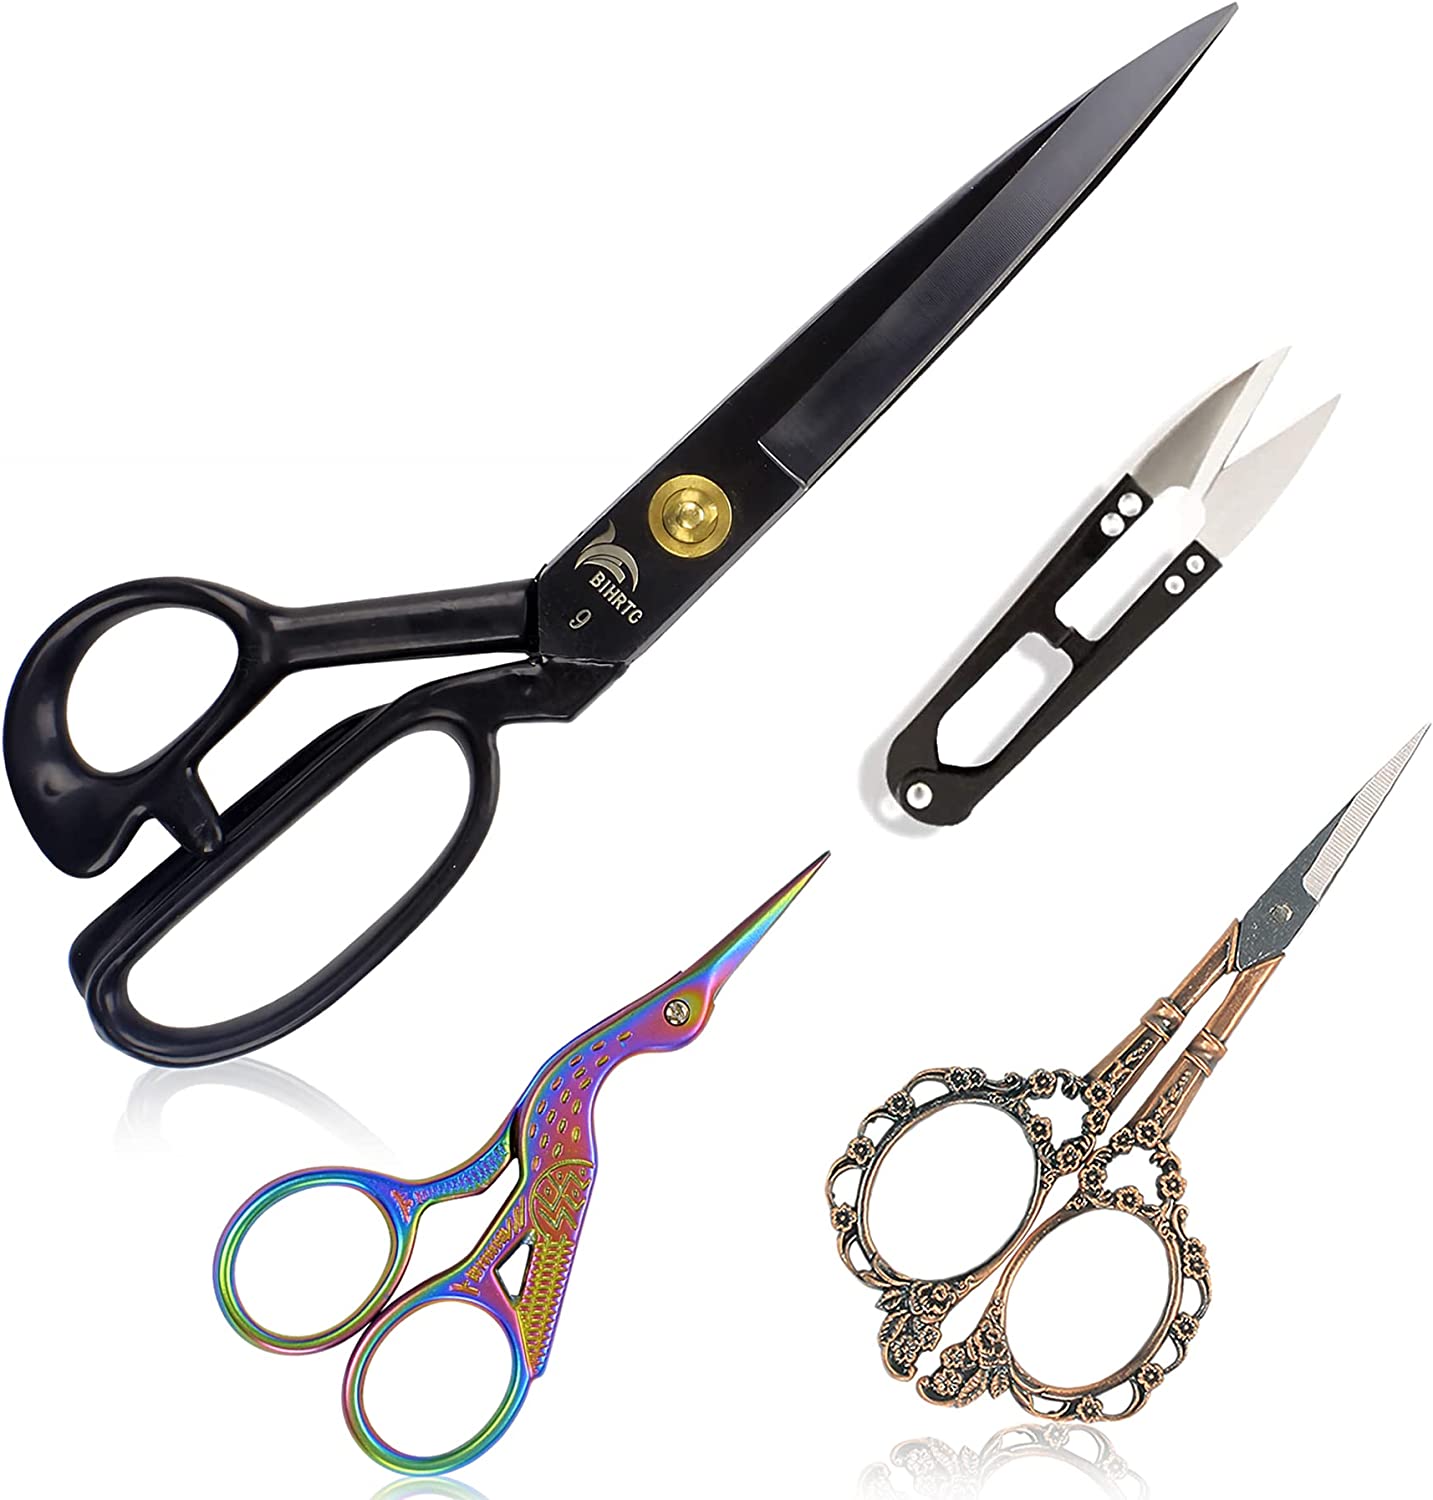 iBayam Household Straight Sewing Scissors, 3-Pack